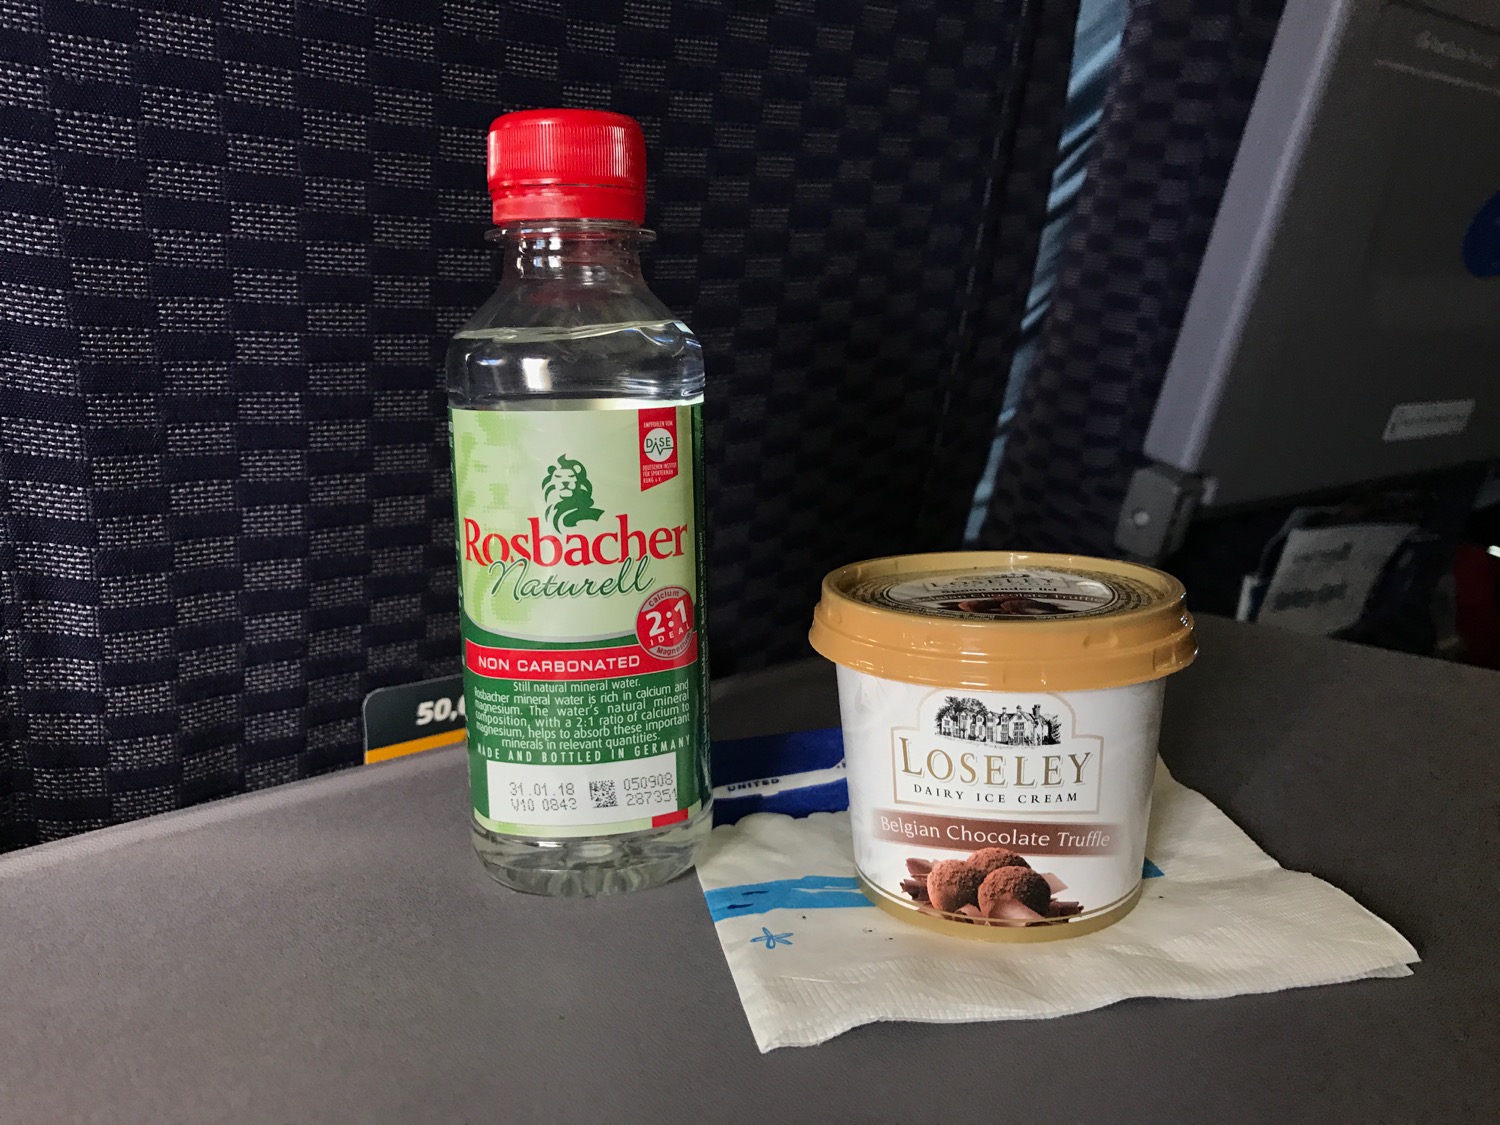 United AMS-IAH Economy Class Meal - 1